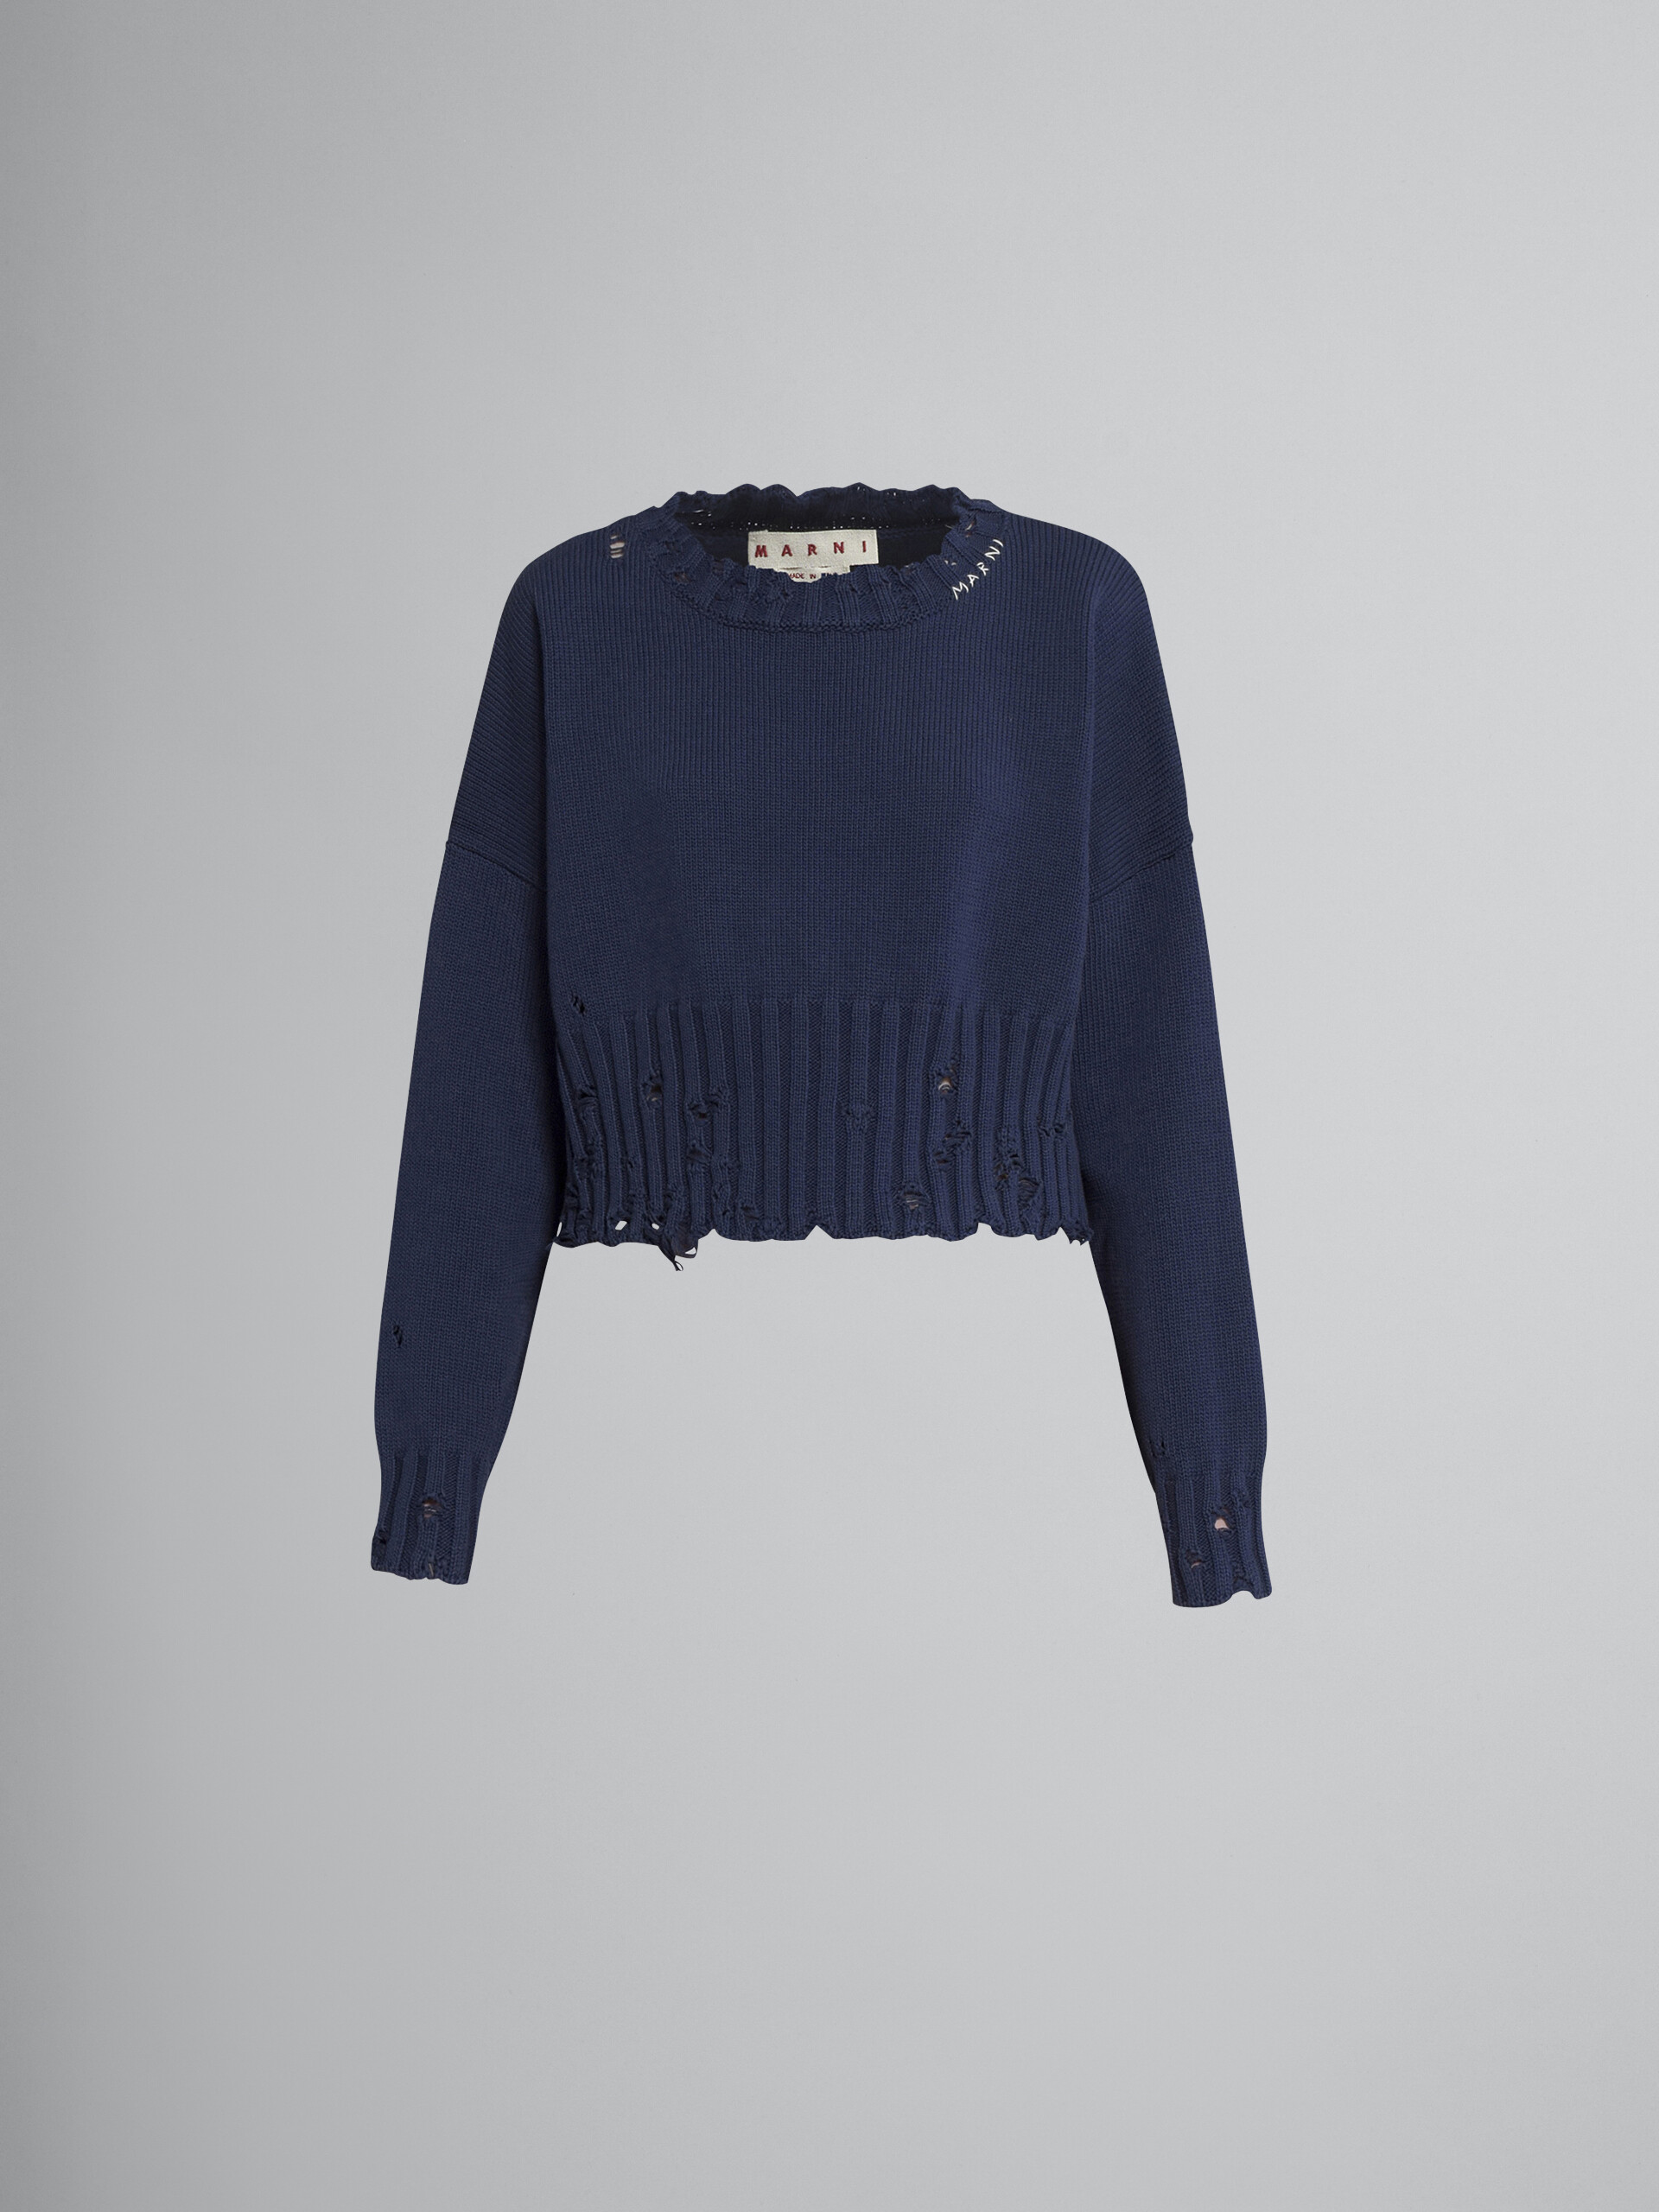 Cropped cotton crewneck sweater - Pullovers - Image 1